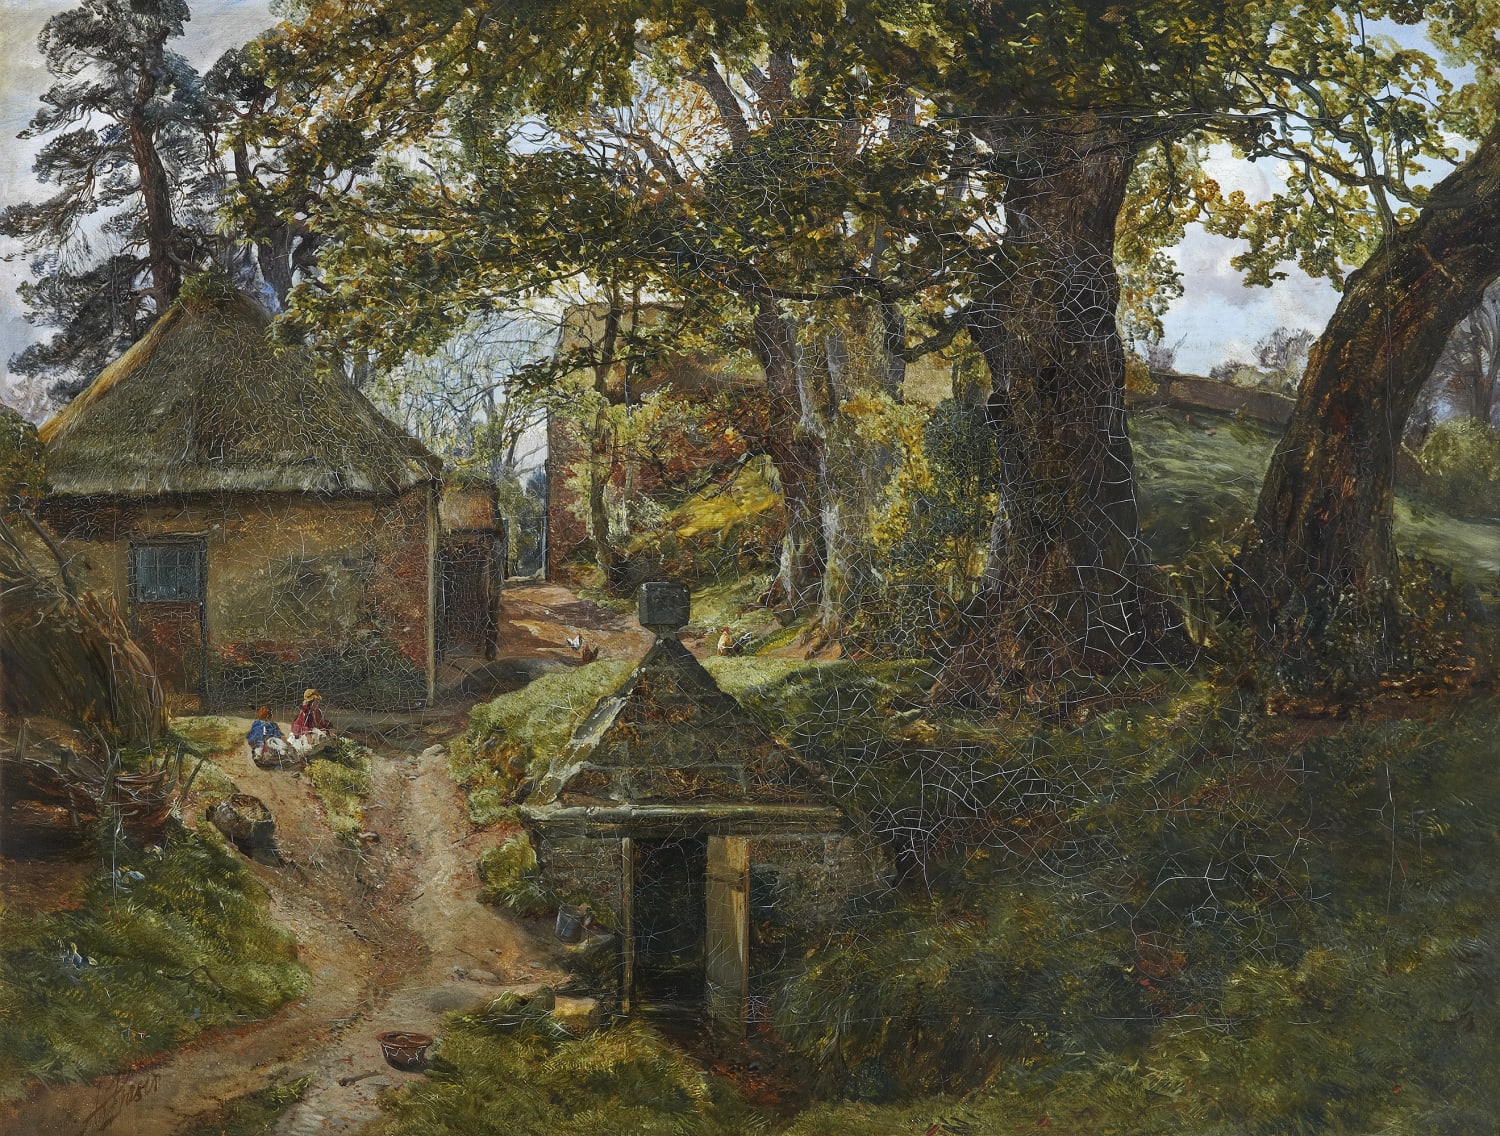 Alexander Fraser Jnr RSA (1827-99), At Barncluith - sketch from nature, May 4th-9th, 1863  oil on canvas, 1863  RSA Diploma Collection Deposit, 1863 or 1868. 2000.027